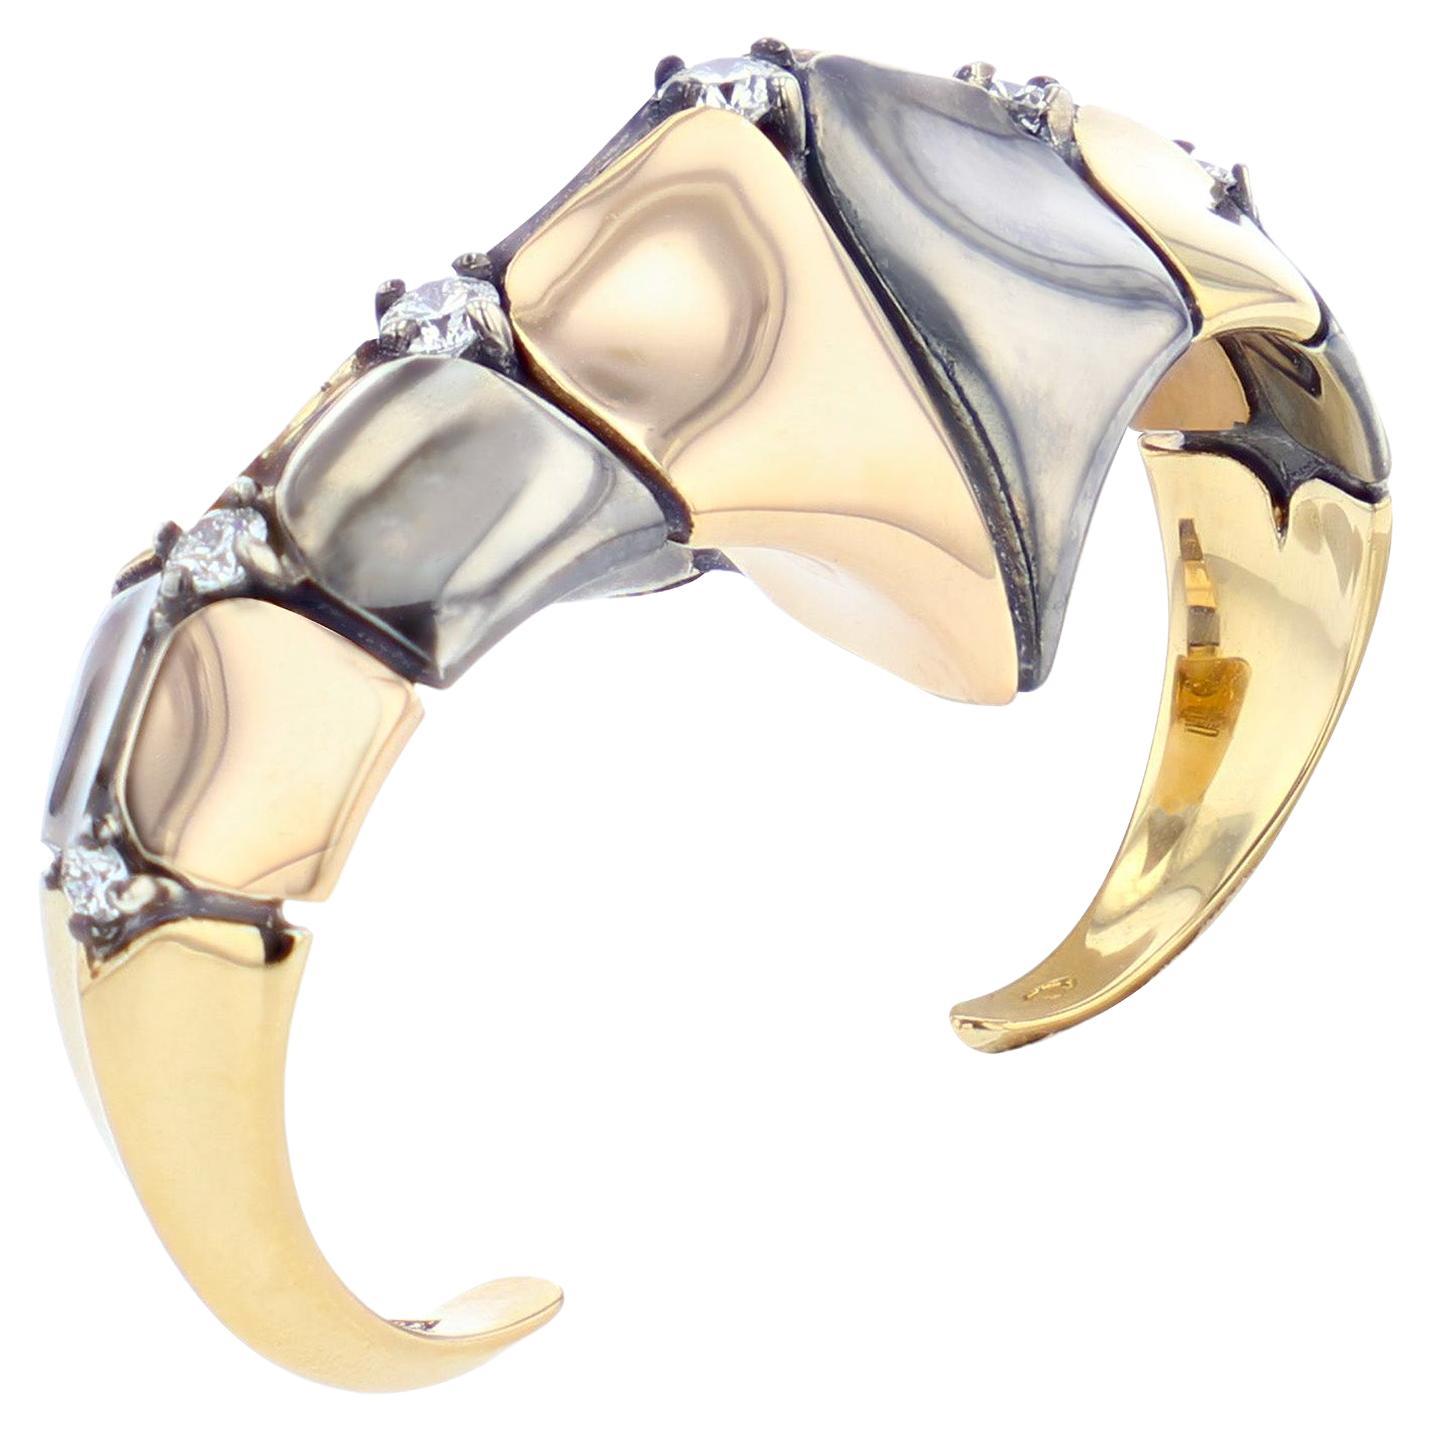 Diamond Dorsal Double Ring in 18k Yellow Gold & Distressed Silver by Elie Top For Sale